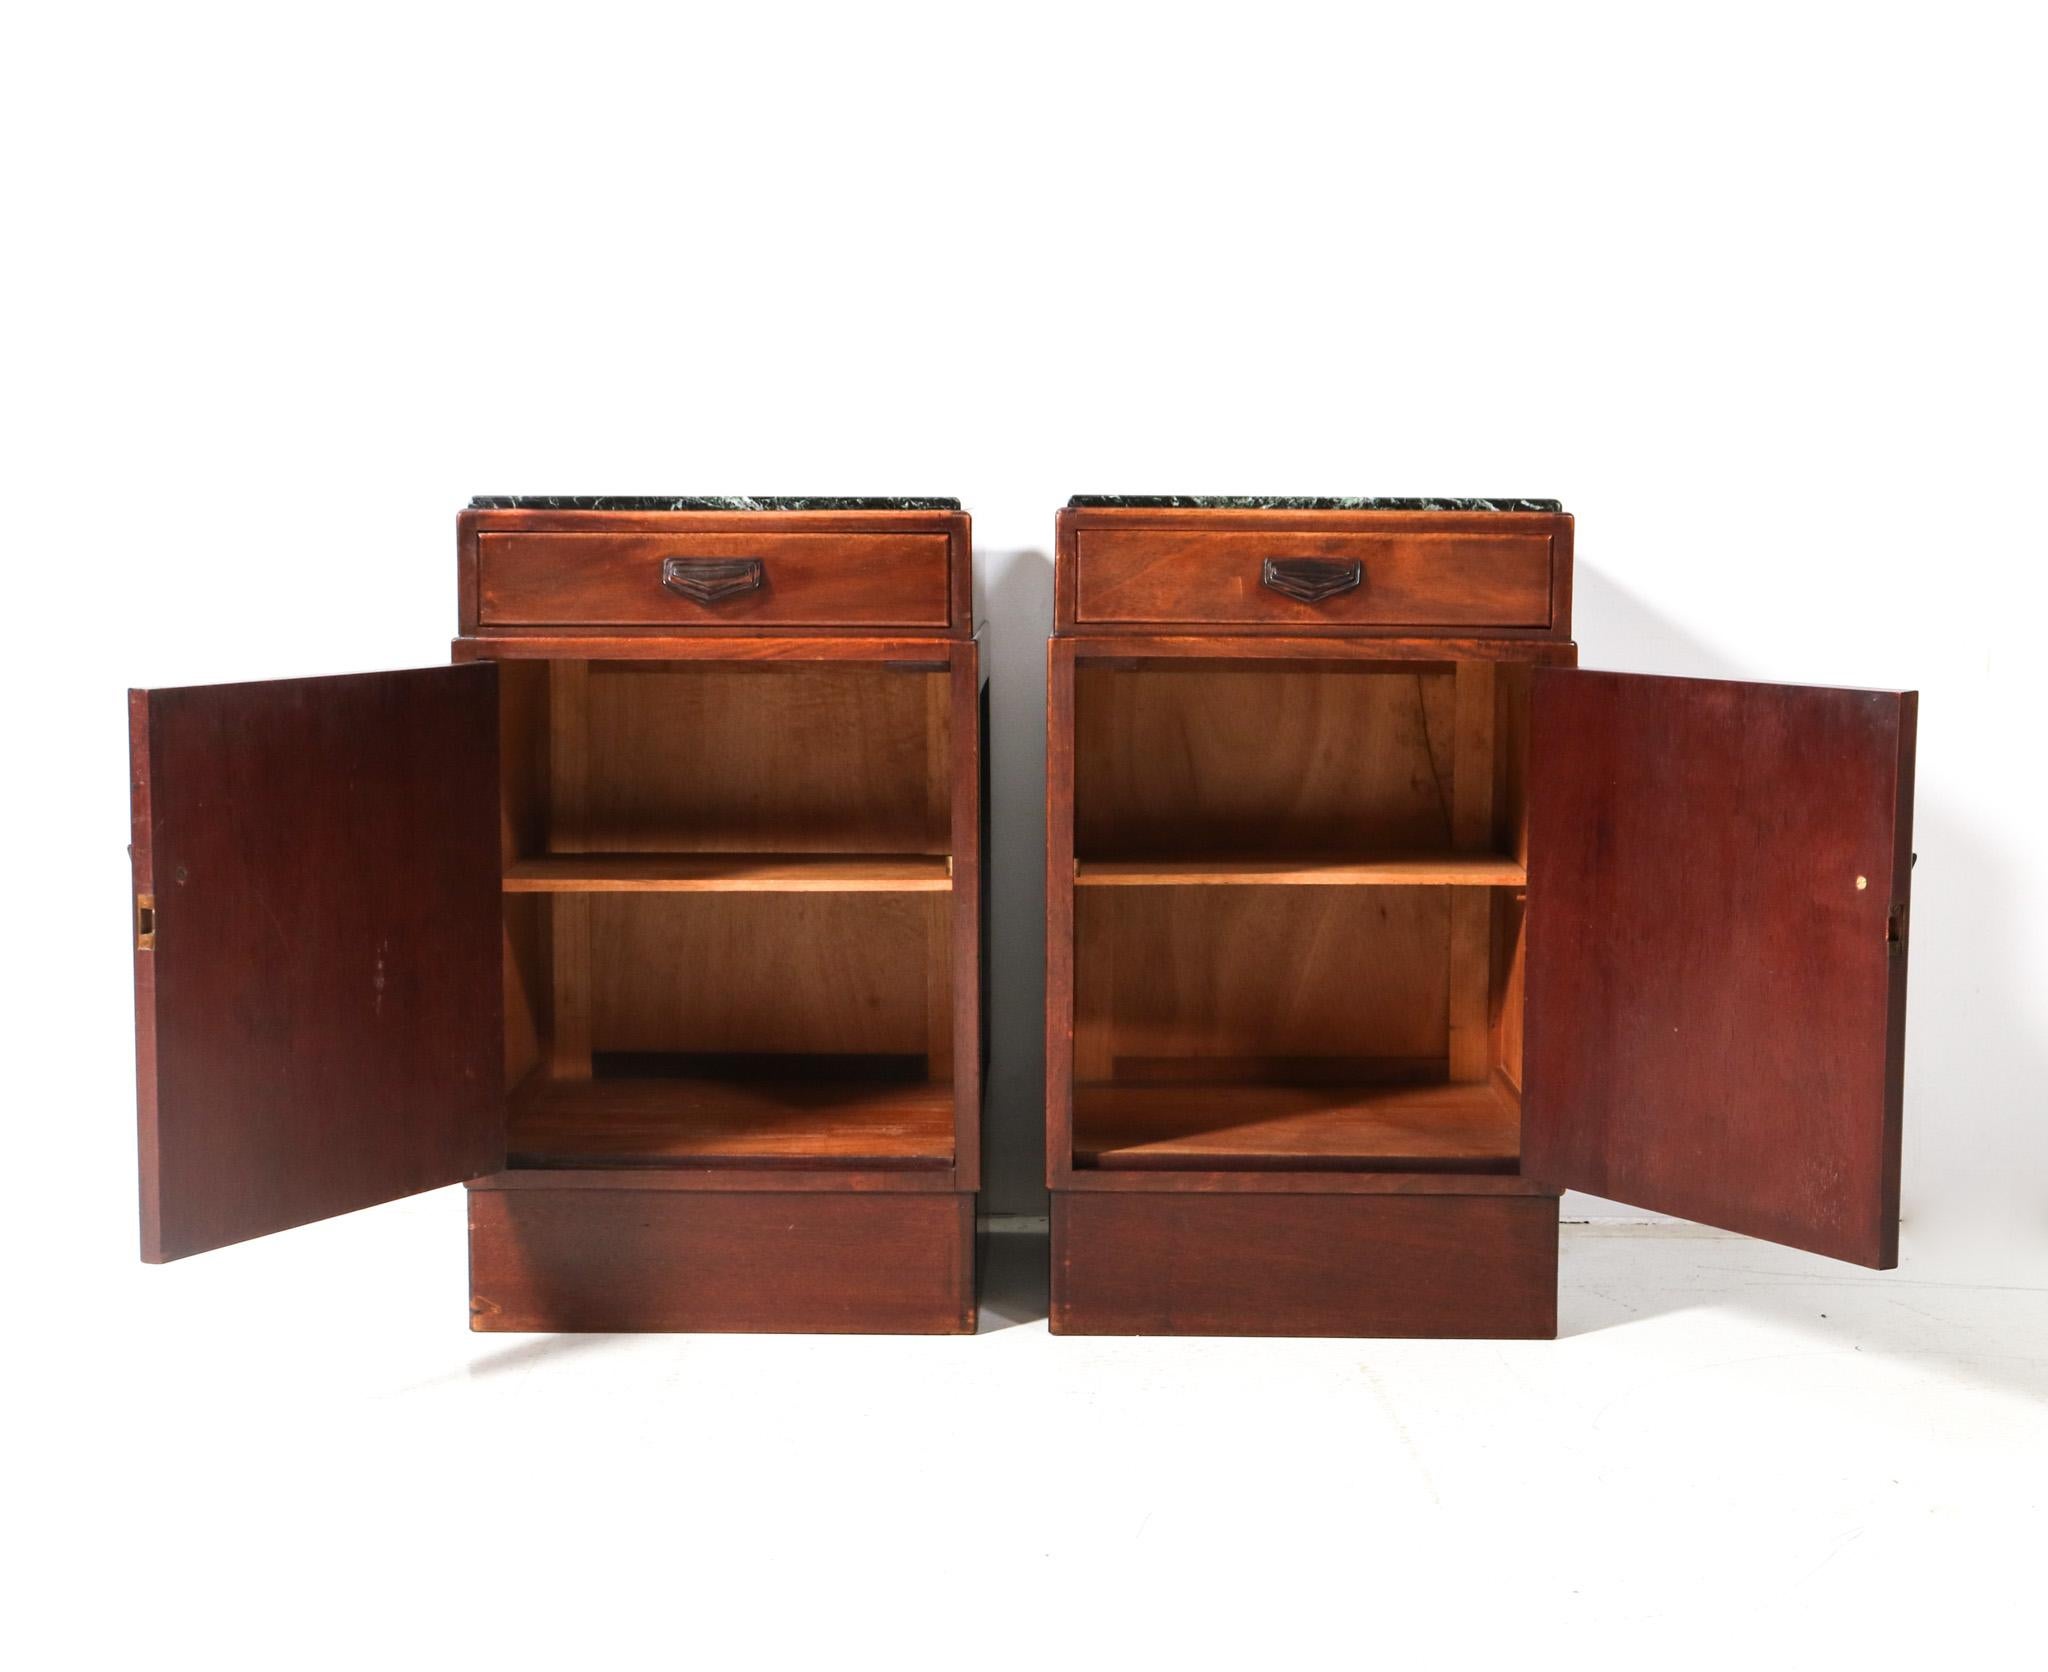 Early 20th Century Walnut Art Deco Amsterdamse School Bedside Tables or Nightstands, 1920s